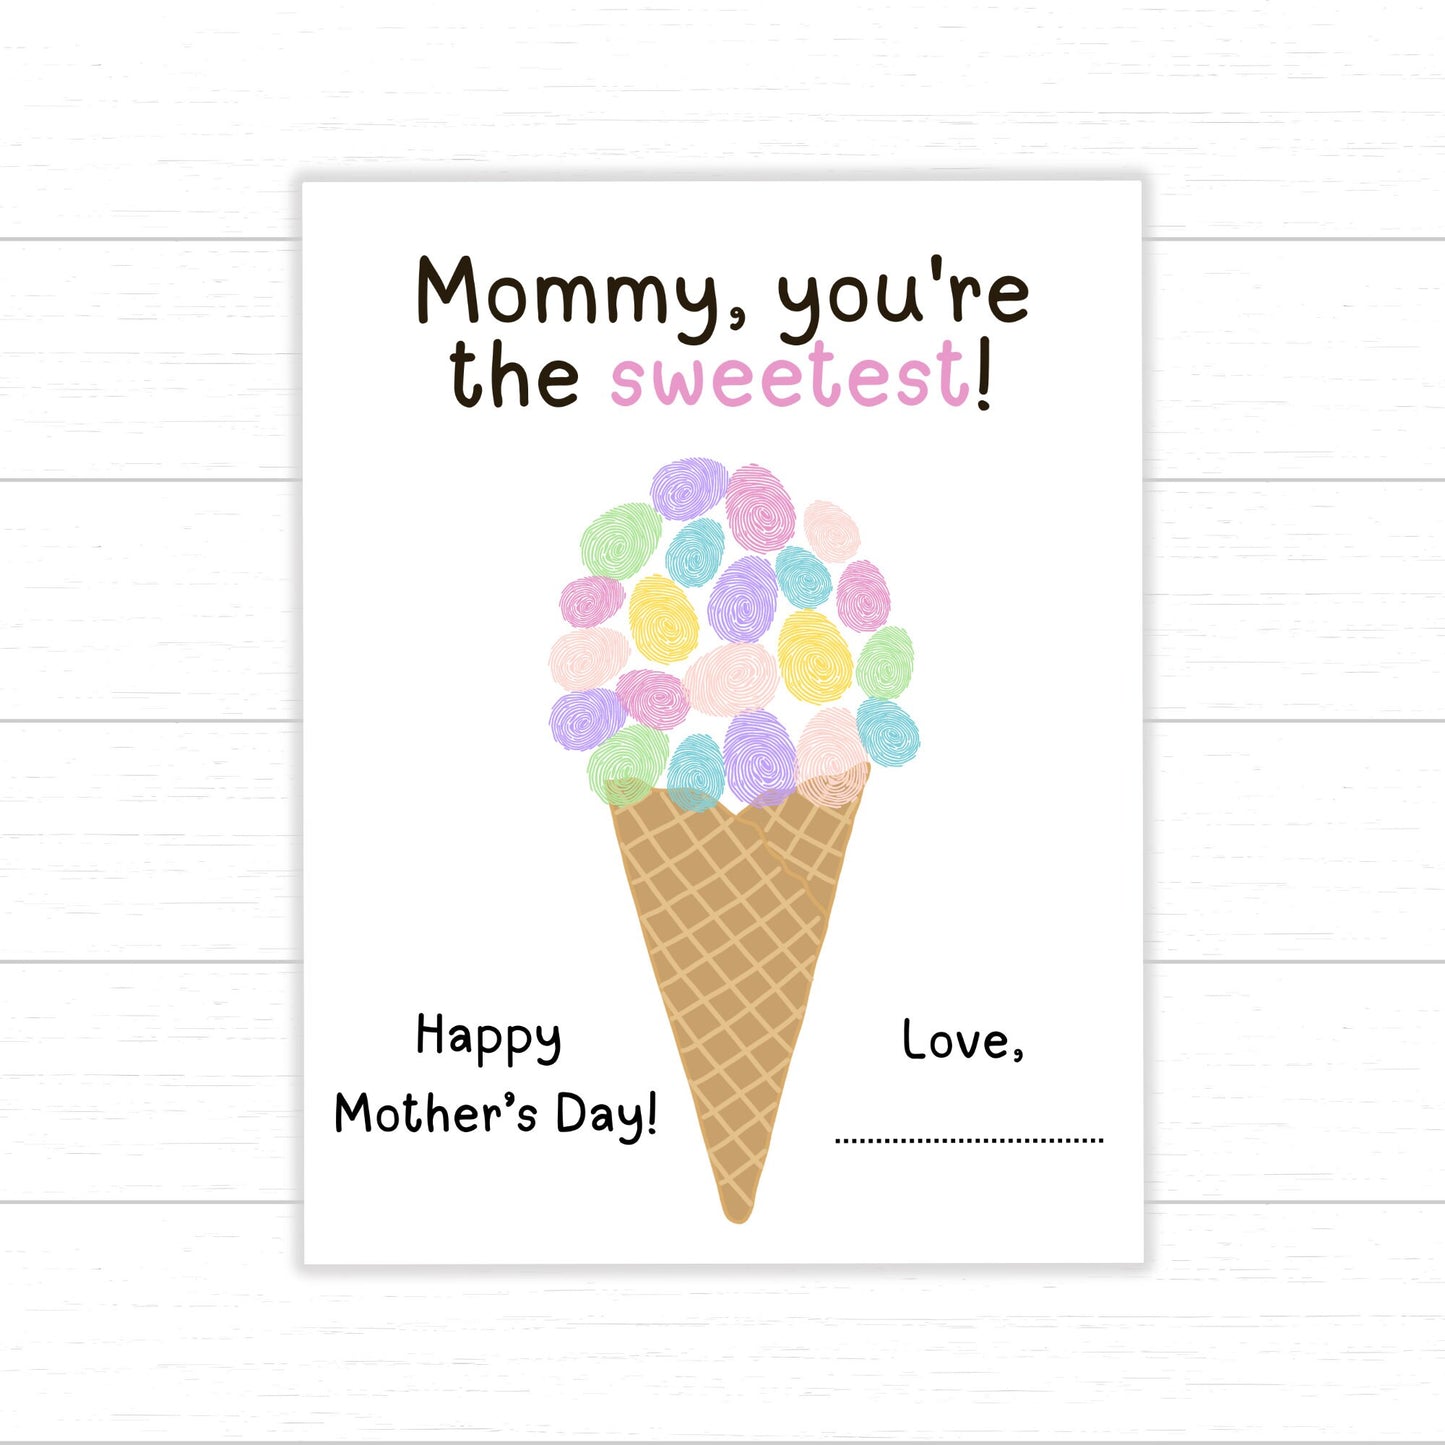 Mother's Day Ice Cream Fingerprint Art, You're the Sweetest, Ice Cream Crafts, DIY Mother's Day Gift, Keepsake for Mom, Mother's Day Craft